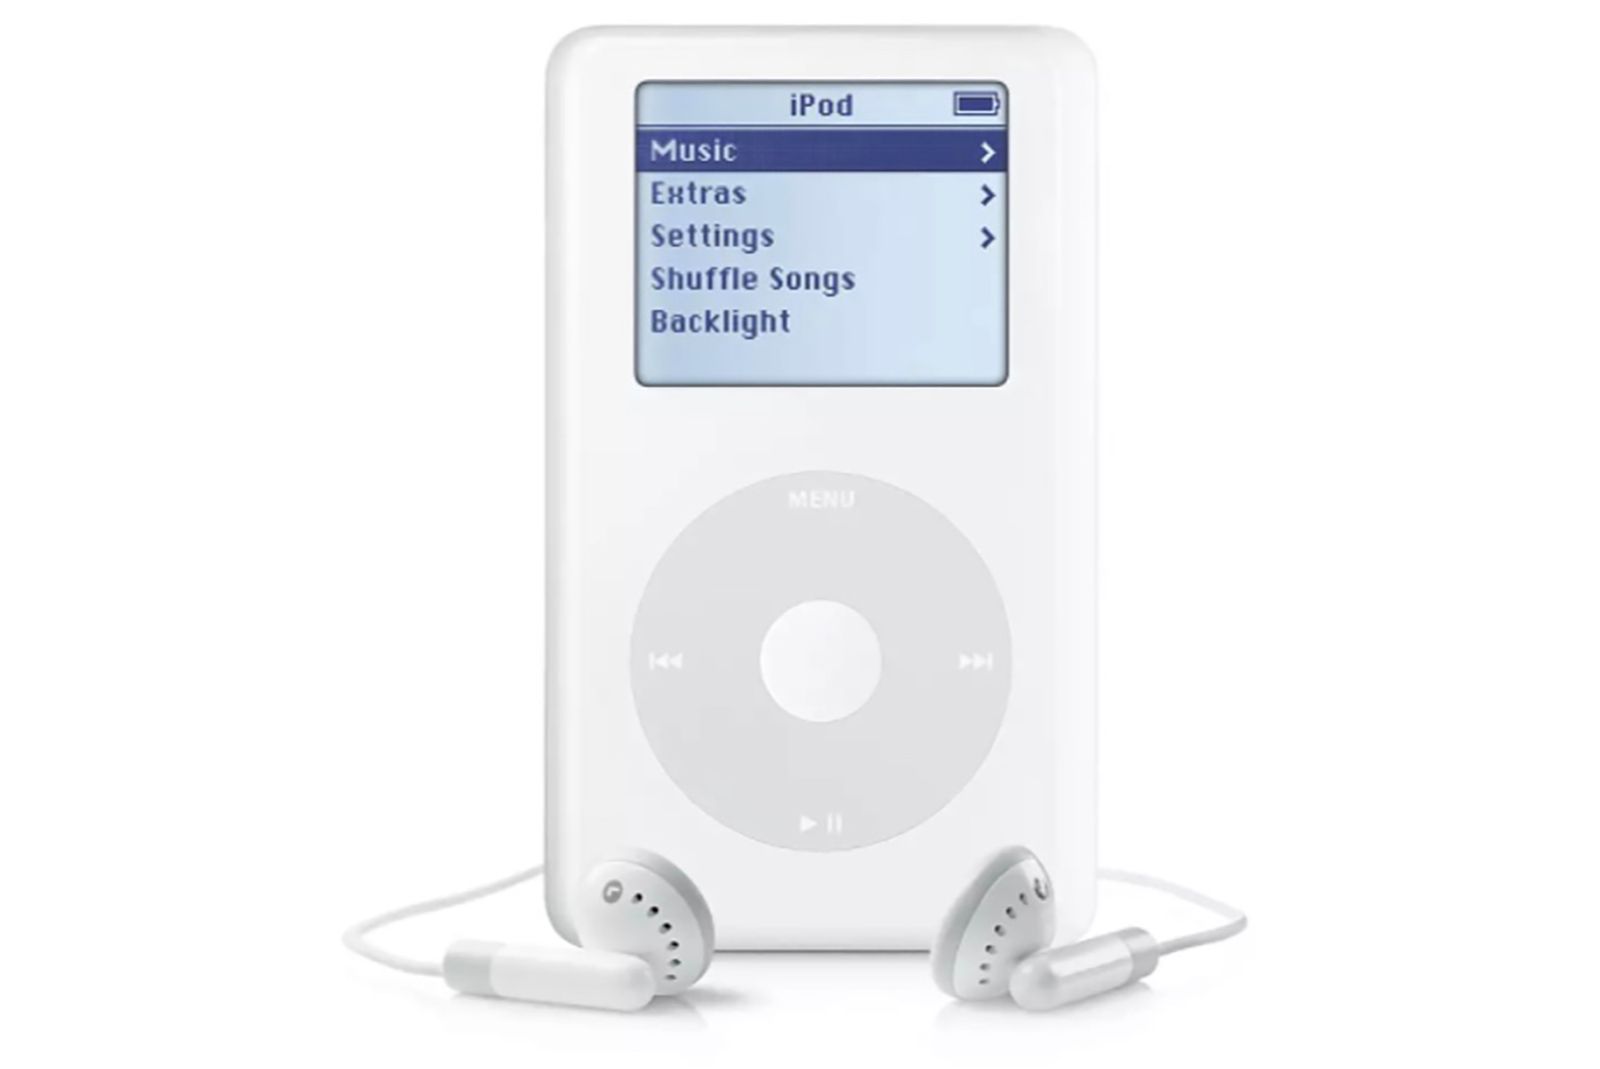 Every Apple iPod Model over the years (2001 to 2022) photo 5